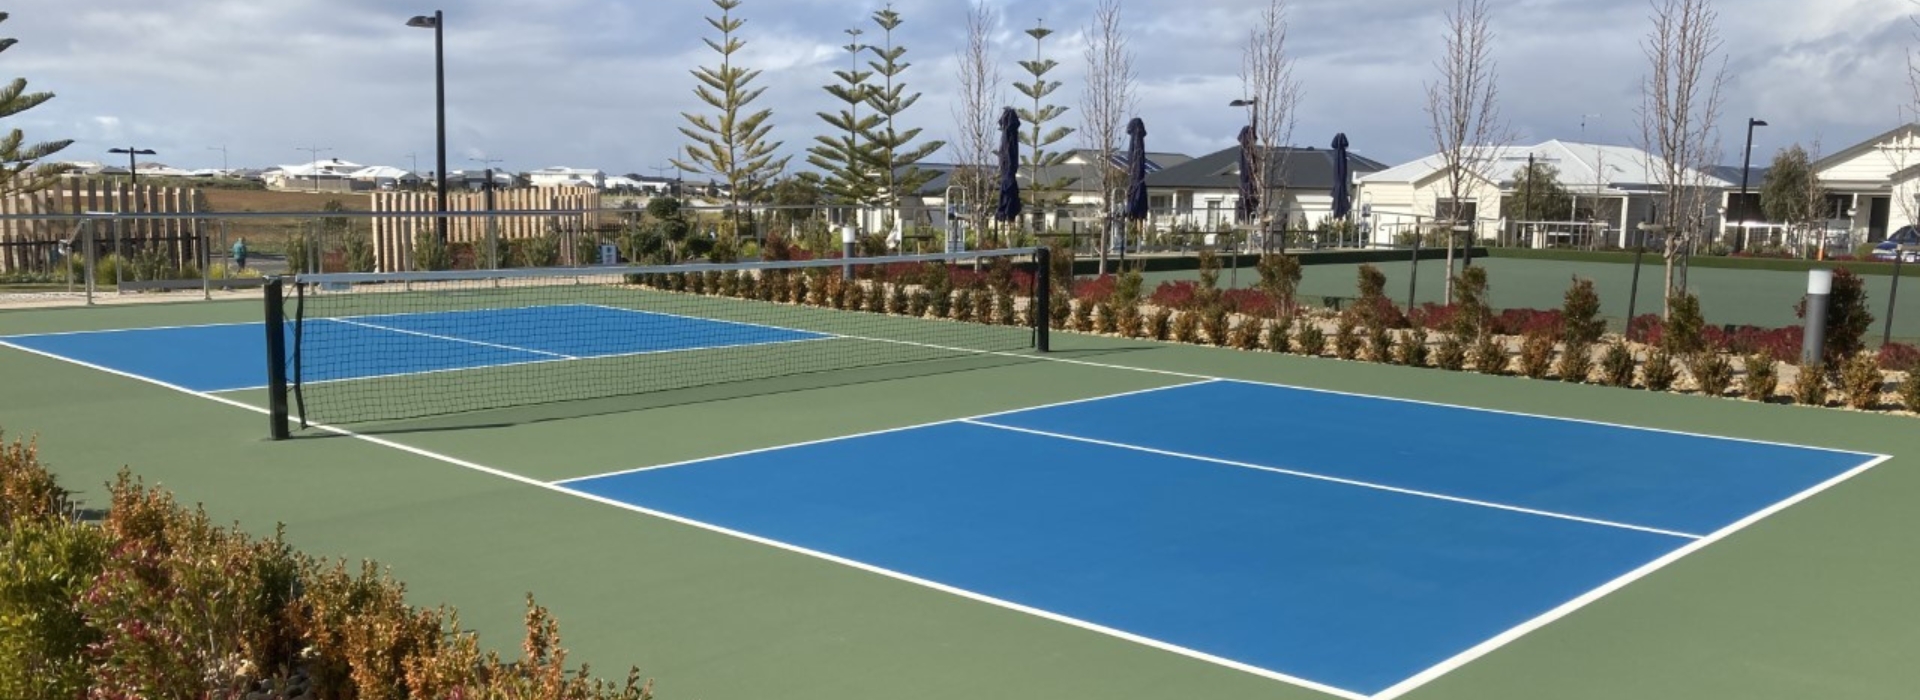 Synthetic Tennis Court Maintenance Tips - Bioscapes Group